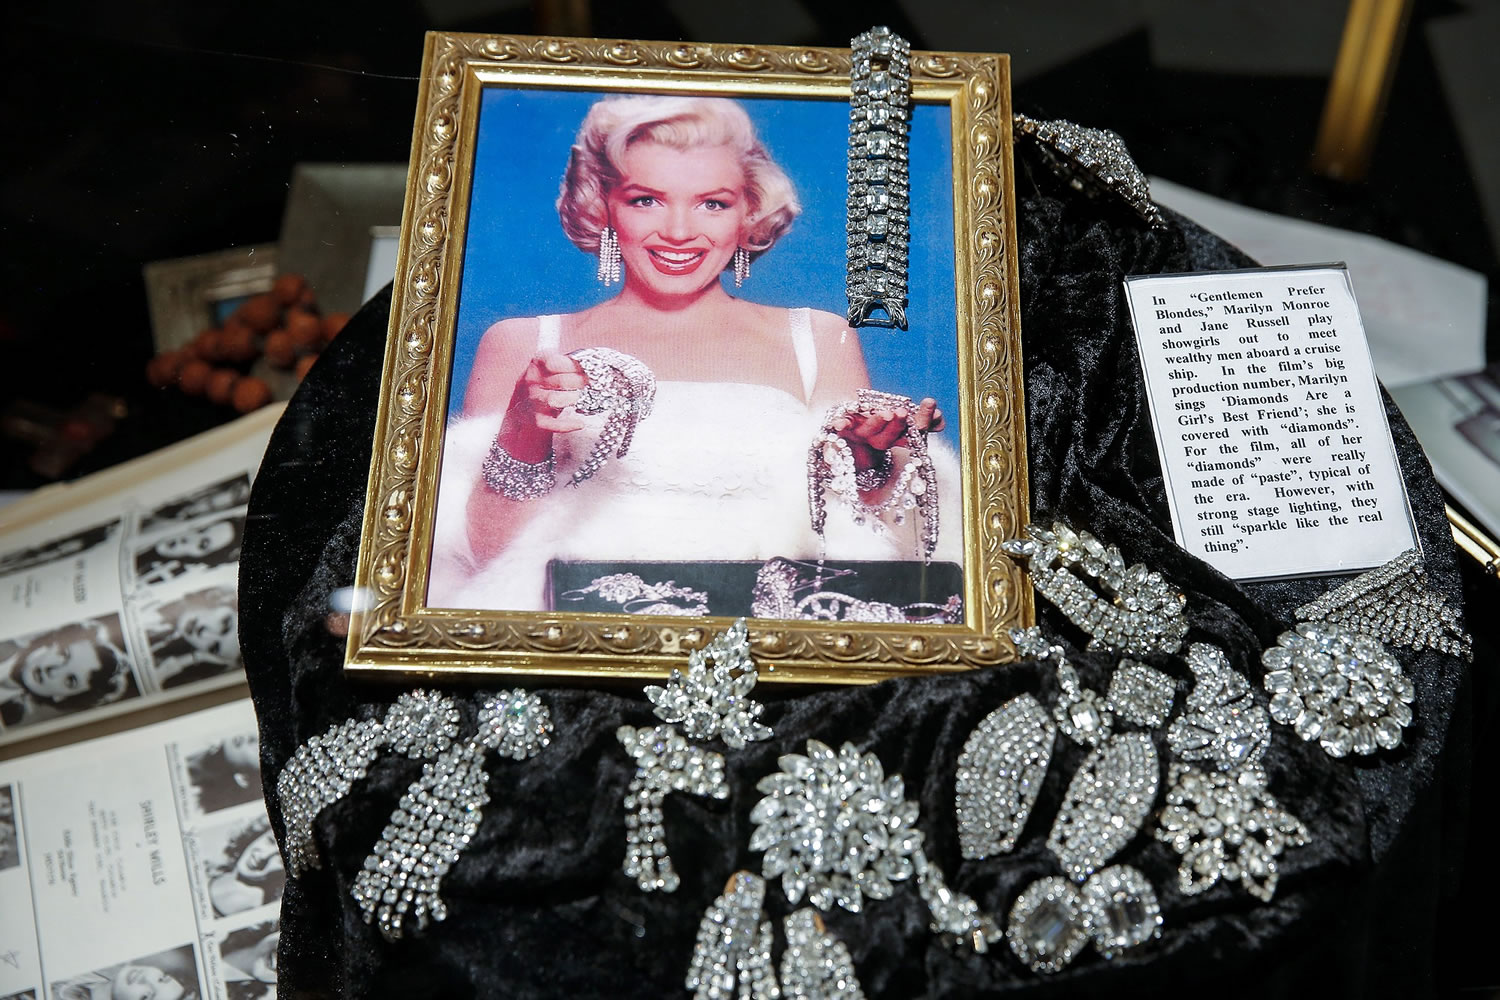 Marilyn Monroe: The Exhibit - The Hollywood Museum